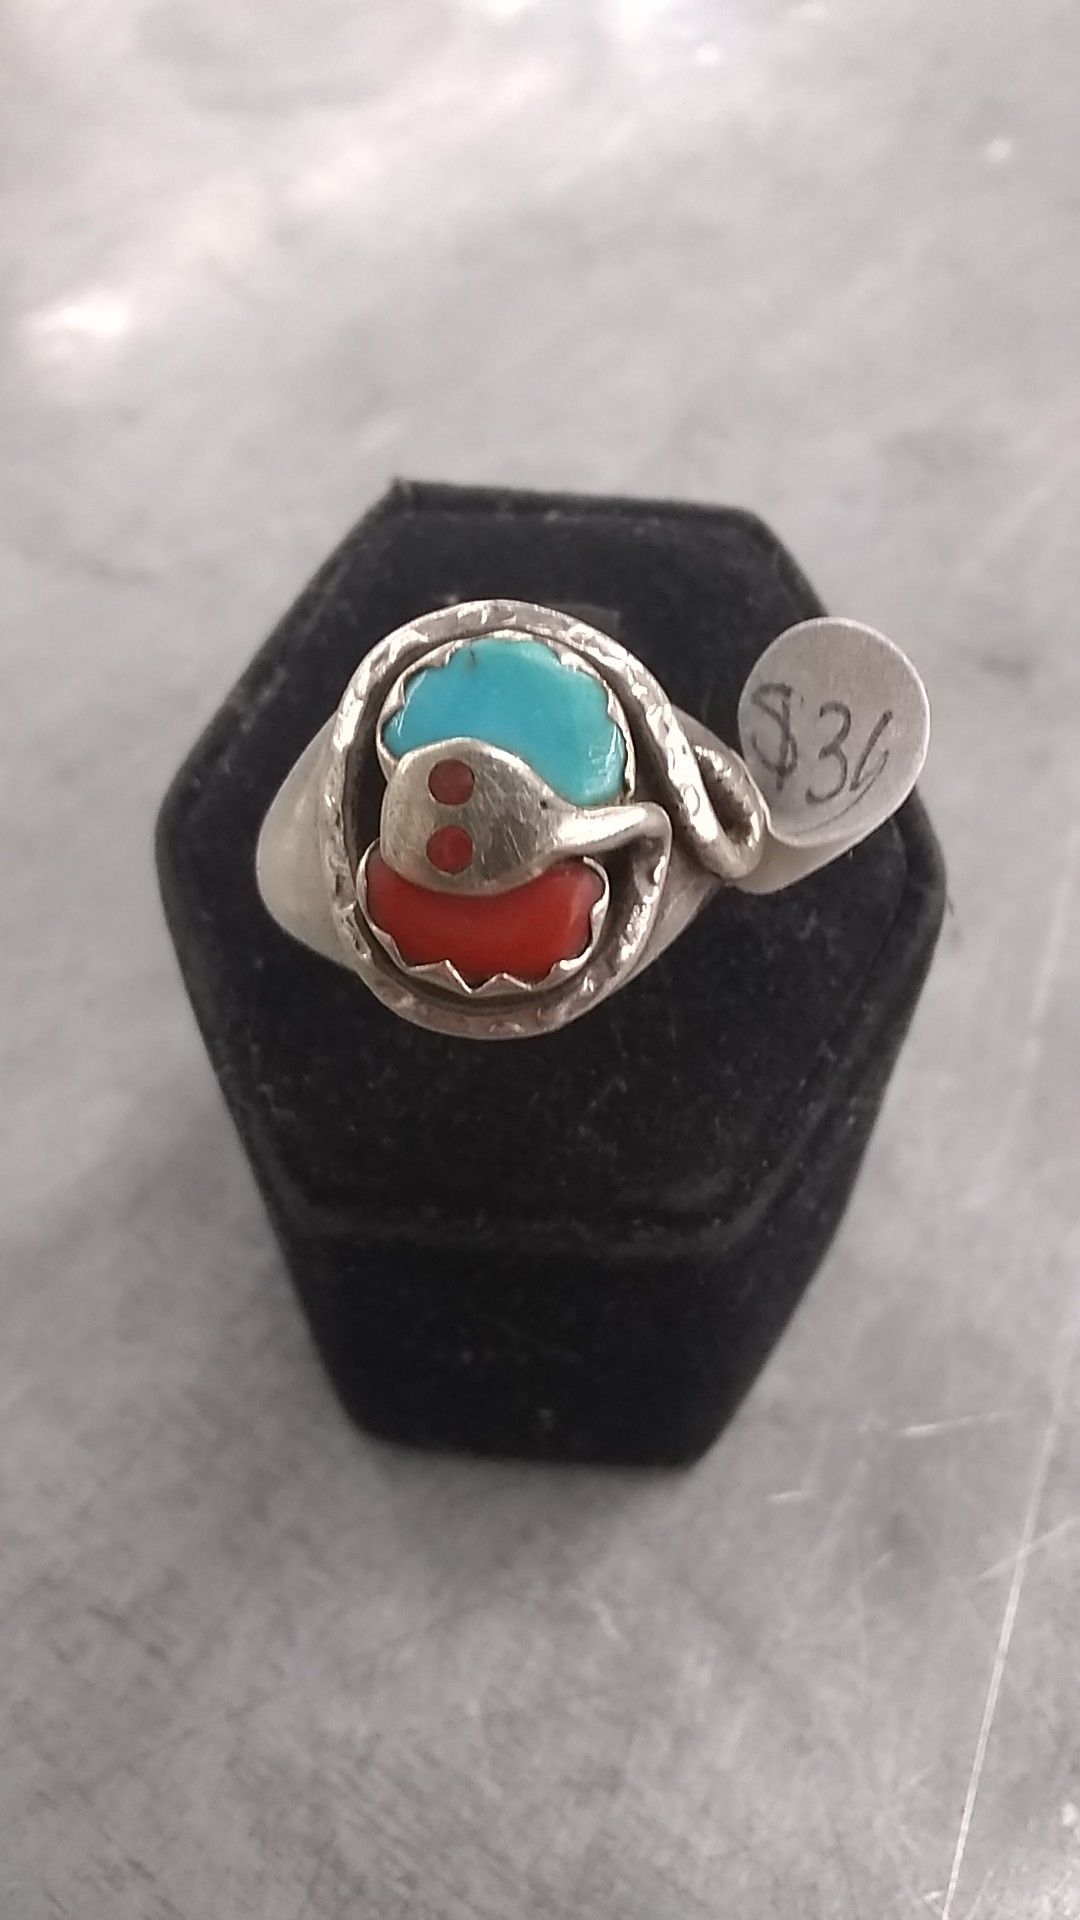 Turquoise and coral ring w/ elephant design